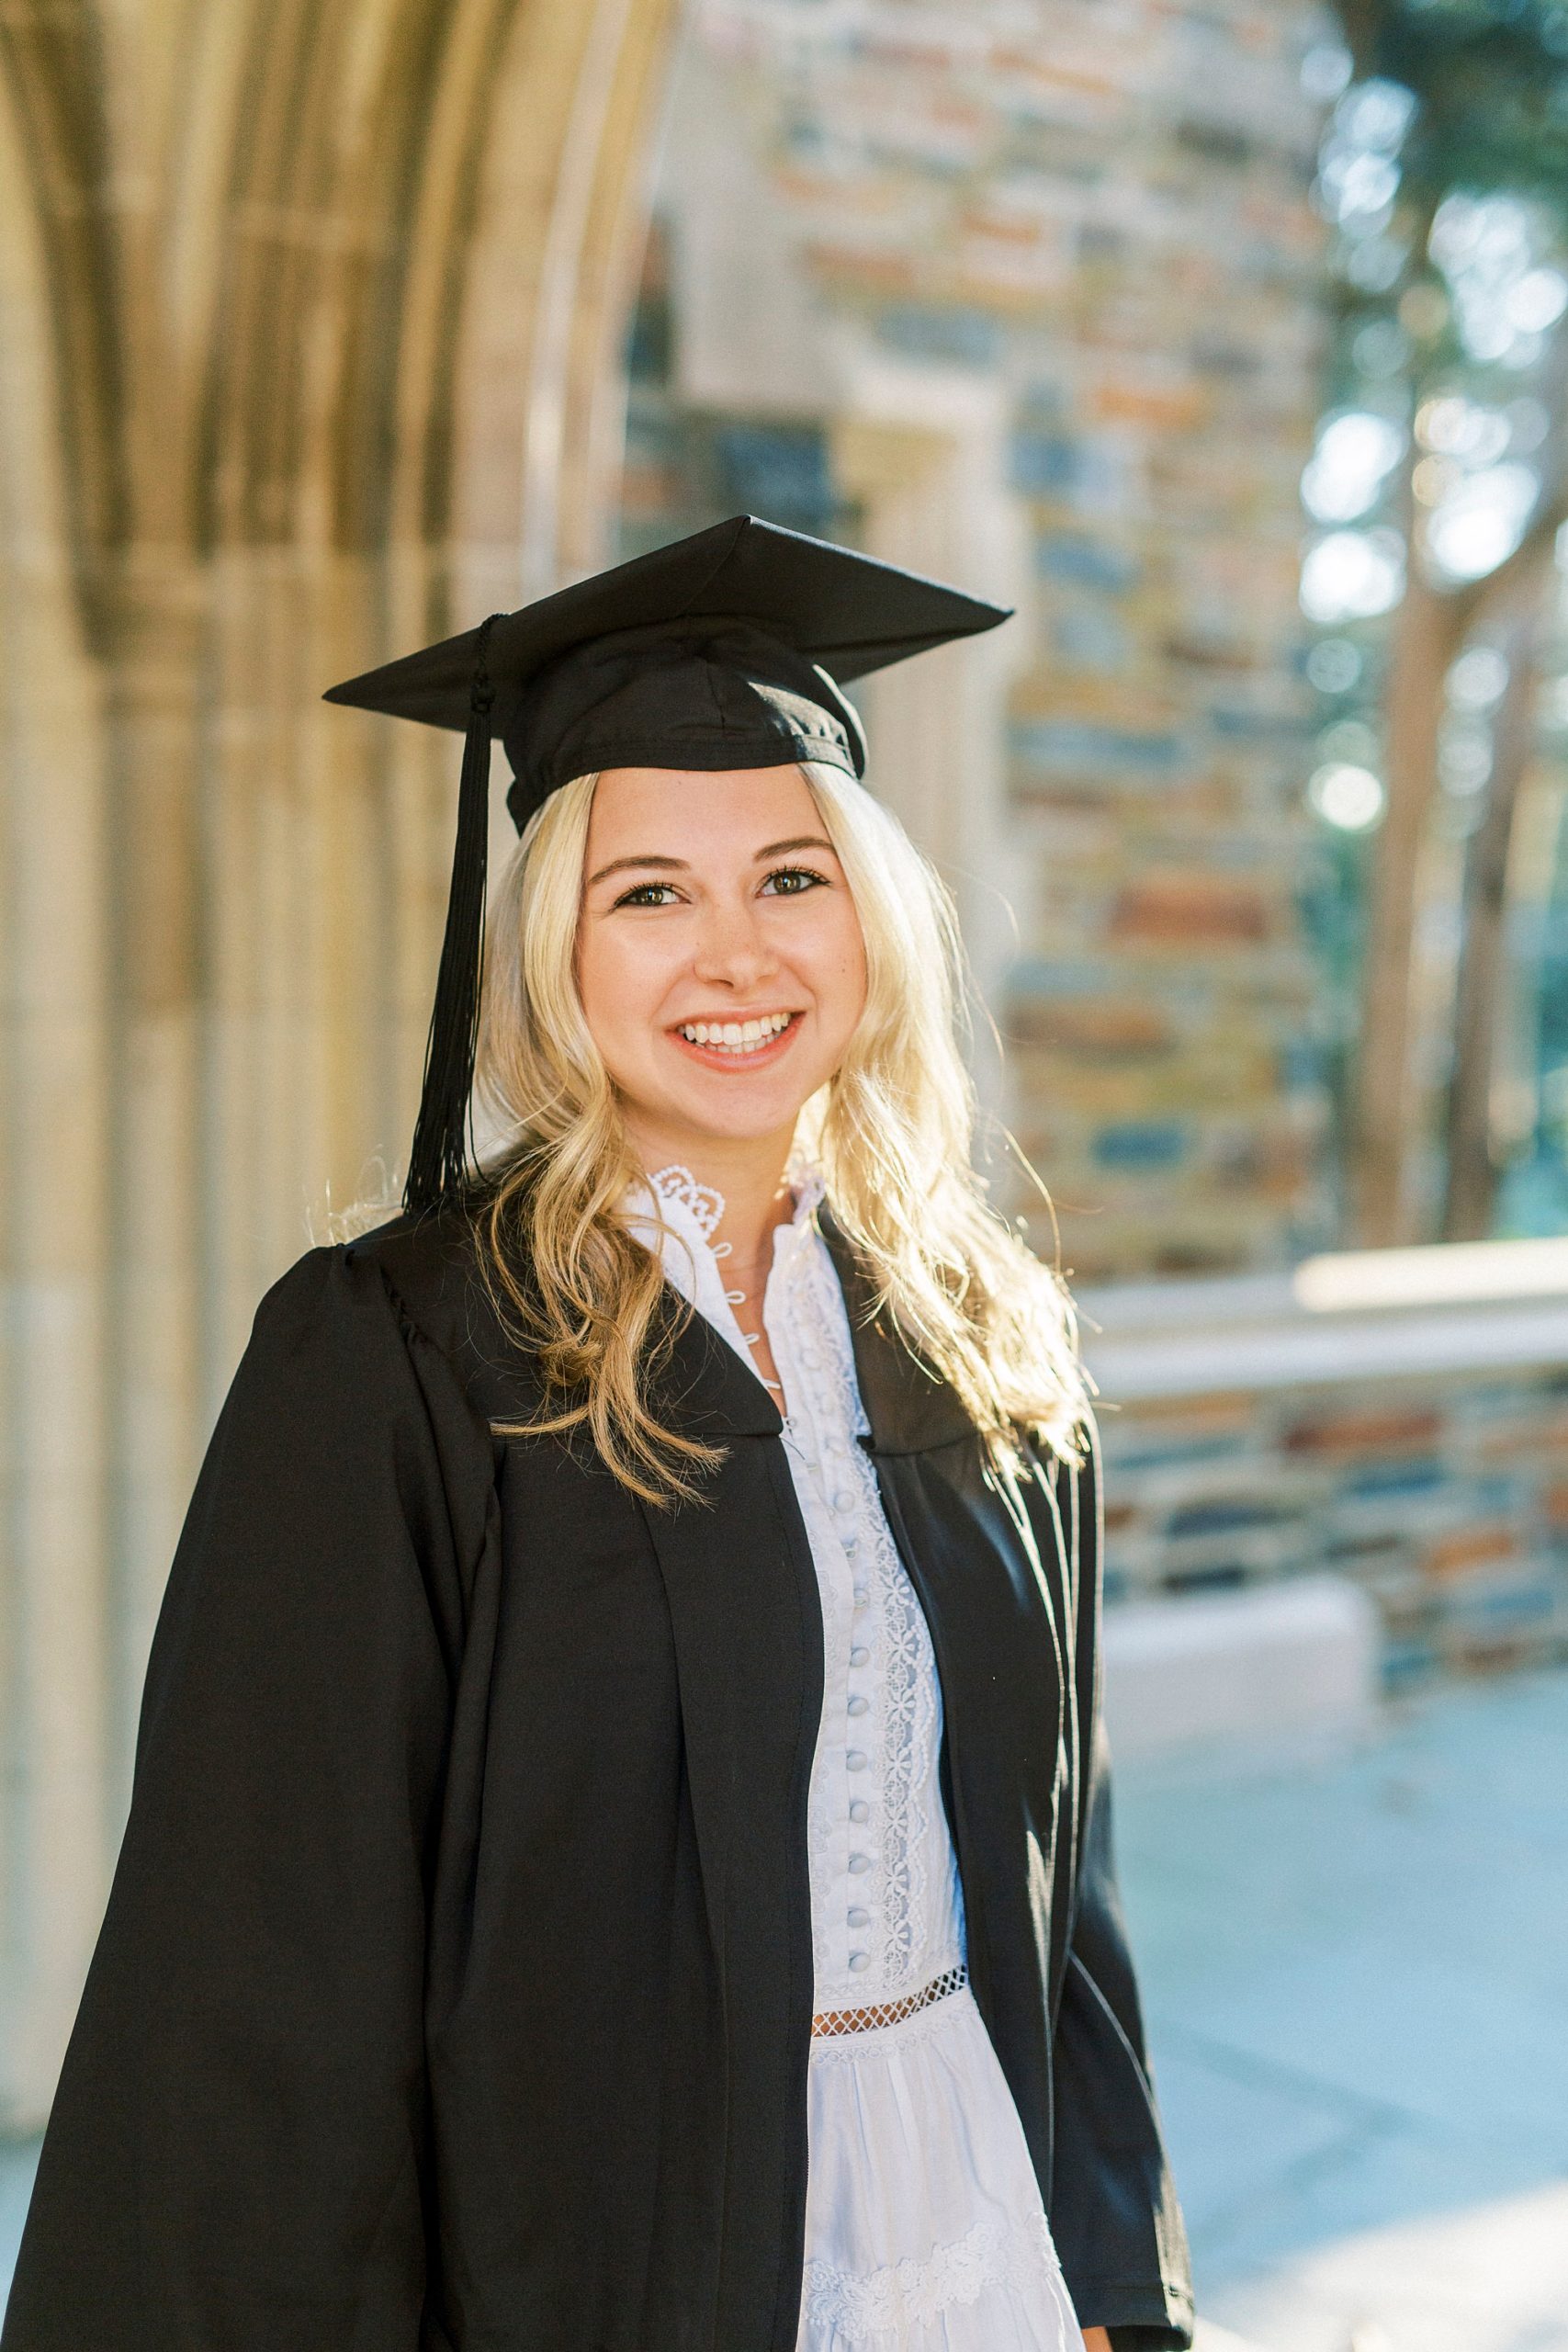 student in cap and gown poses by archway at Duke Chapel